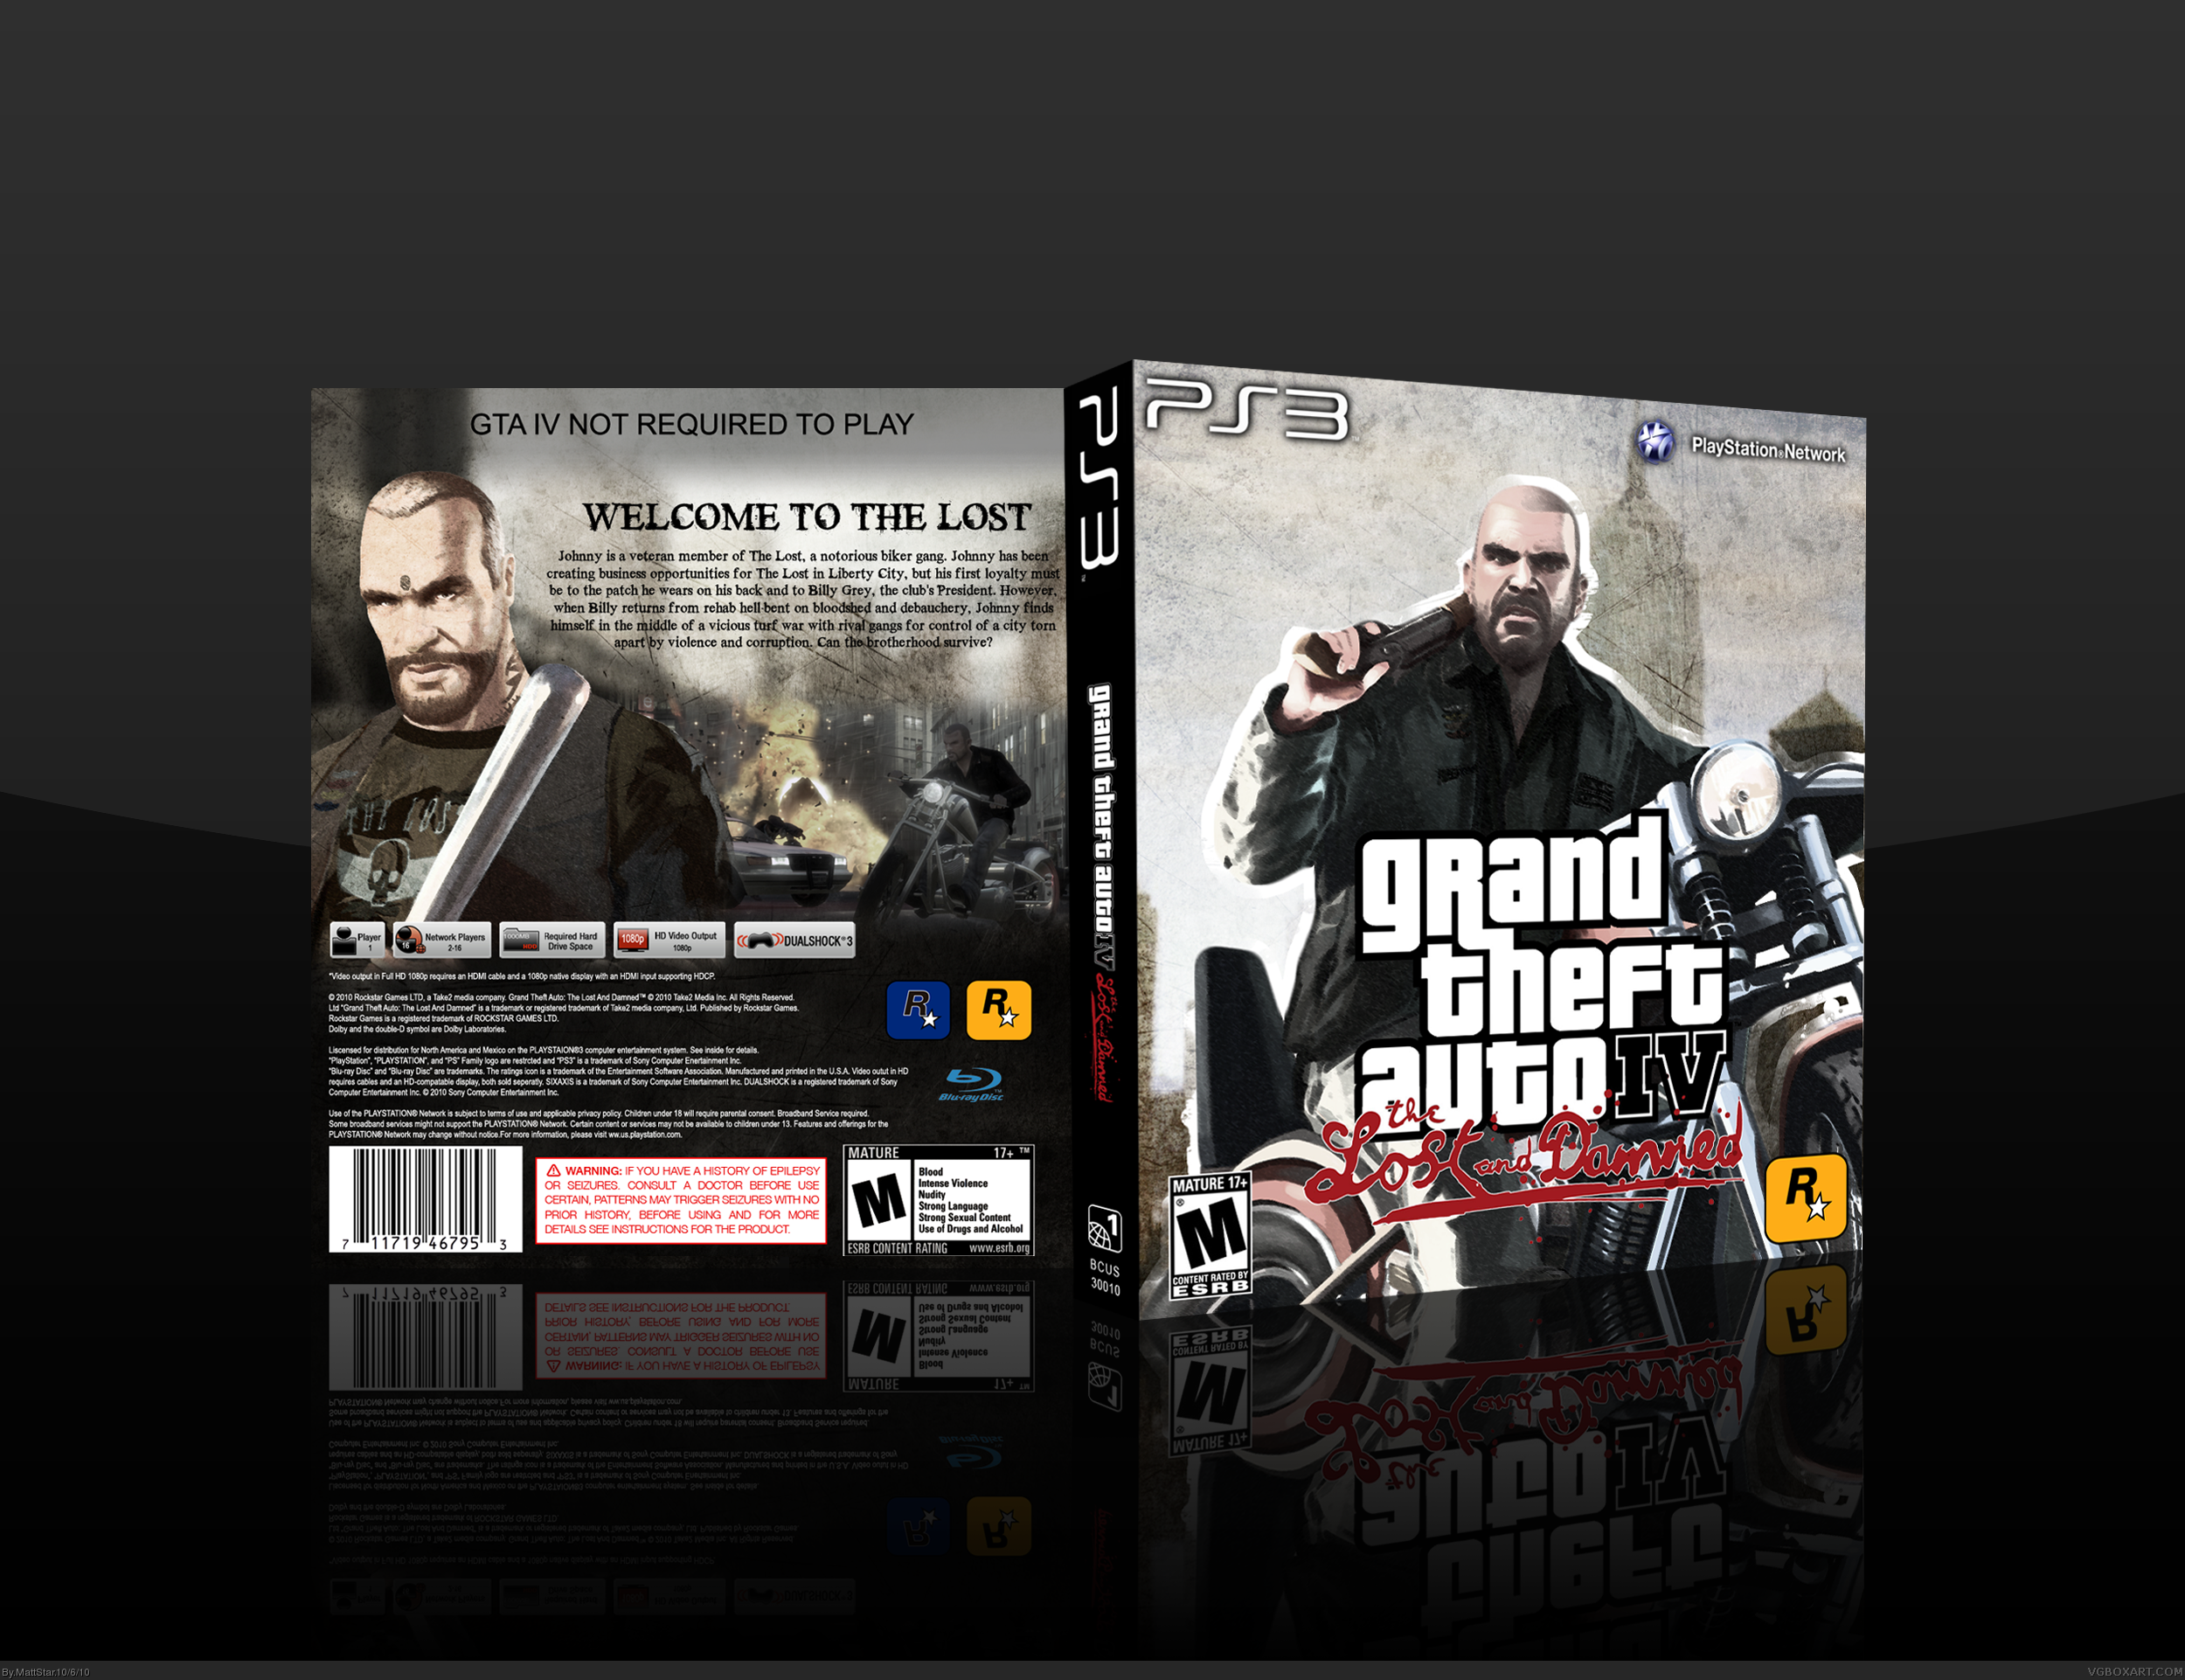 Grand Theft Auto IV: The Lost and Damned box cover